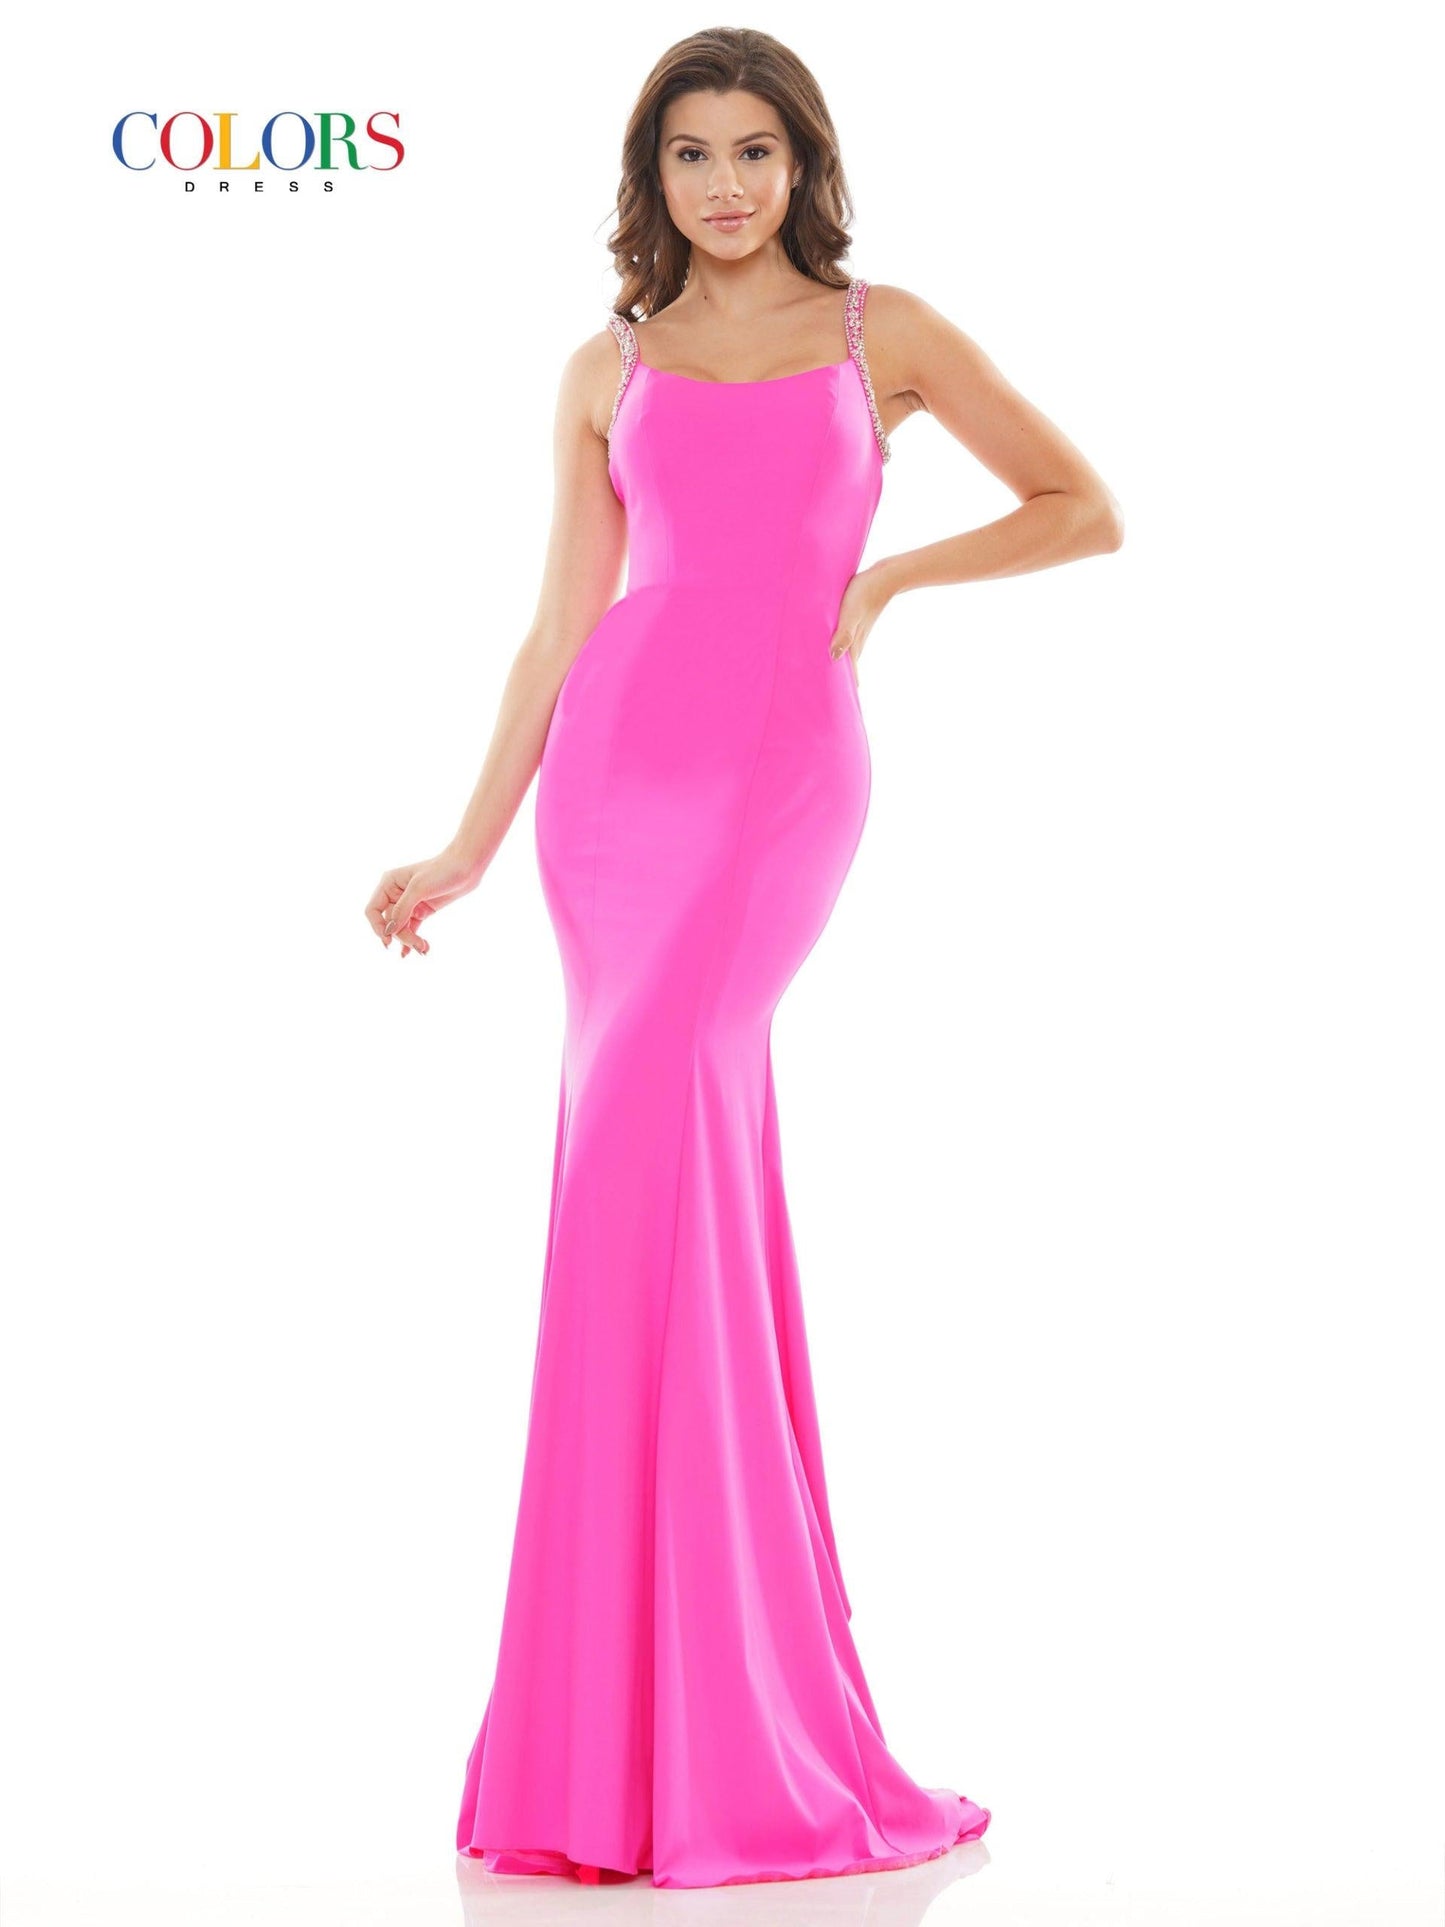 Colors Long Formal Fitted Prom Dress 2695 - The Dress Outlet